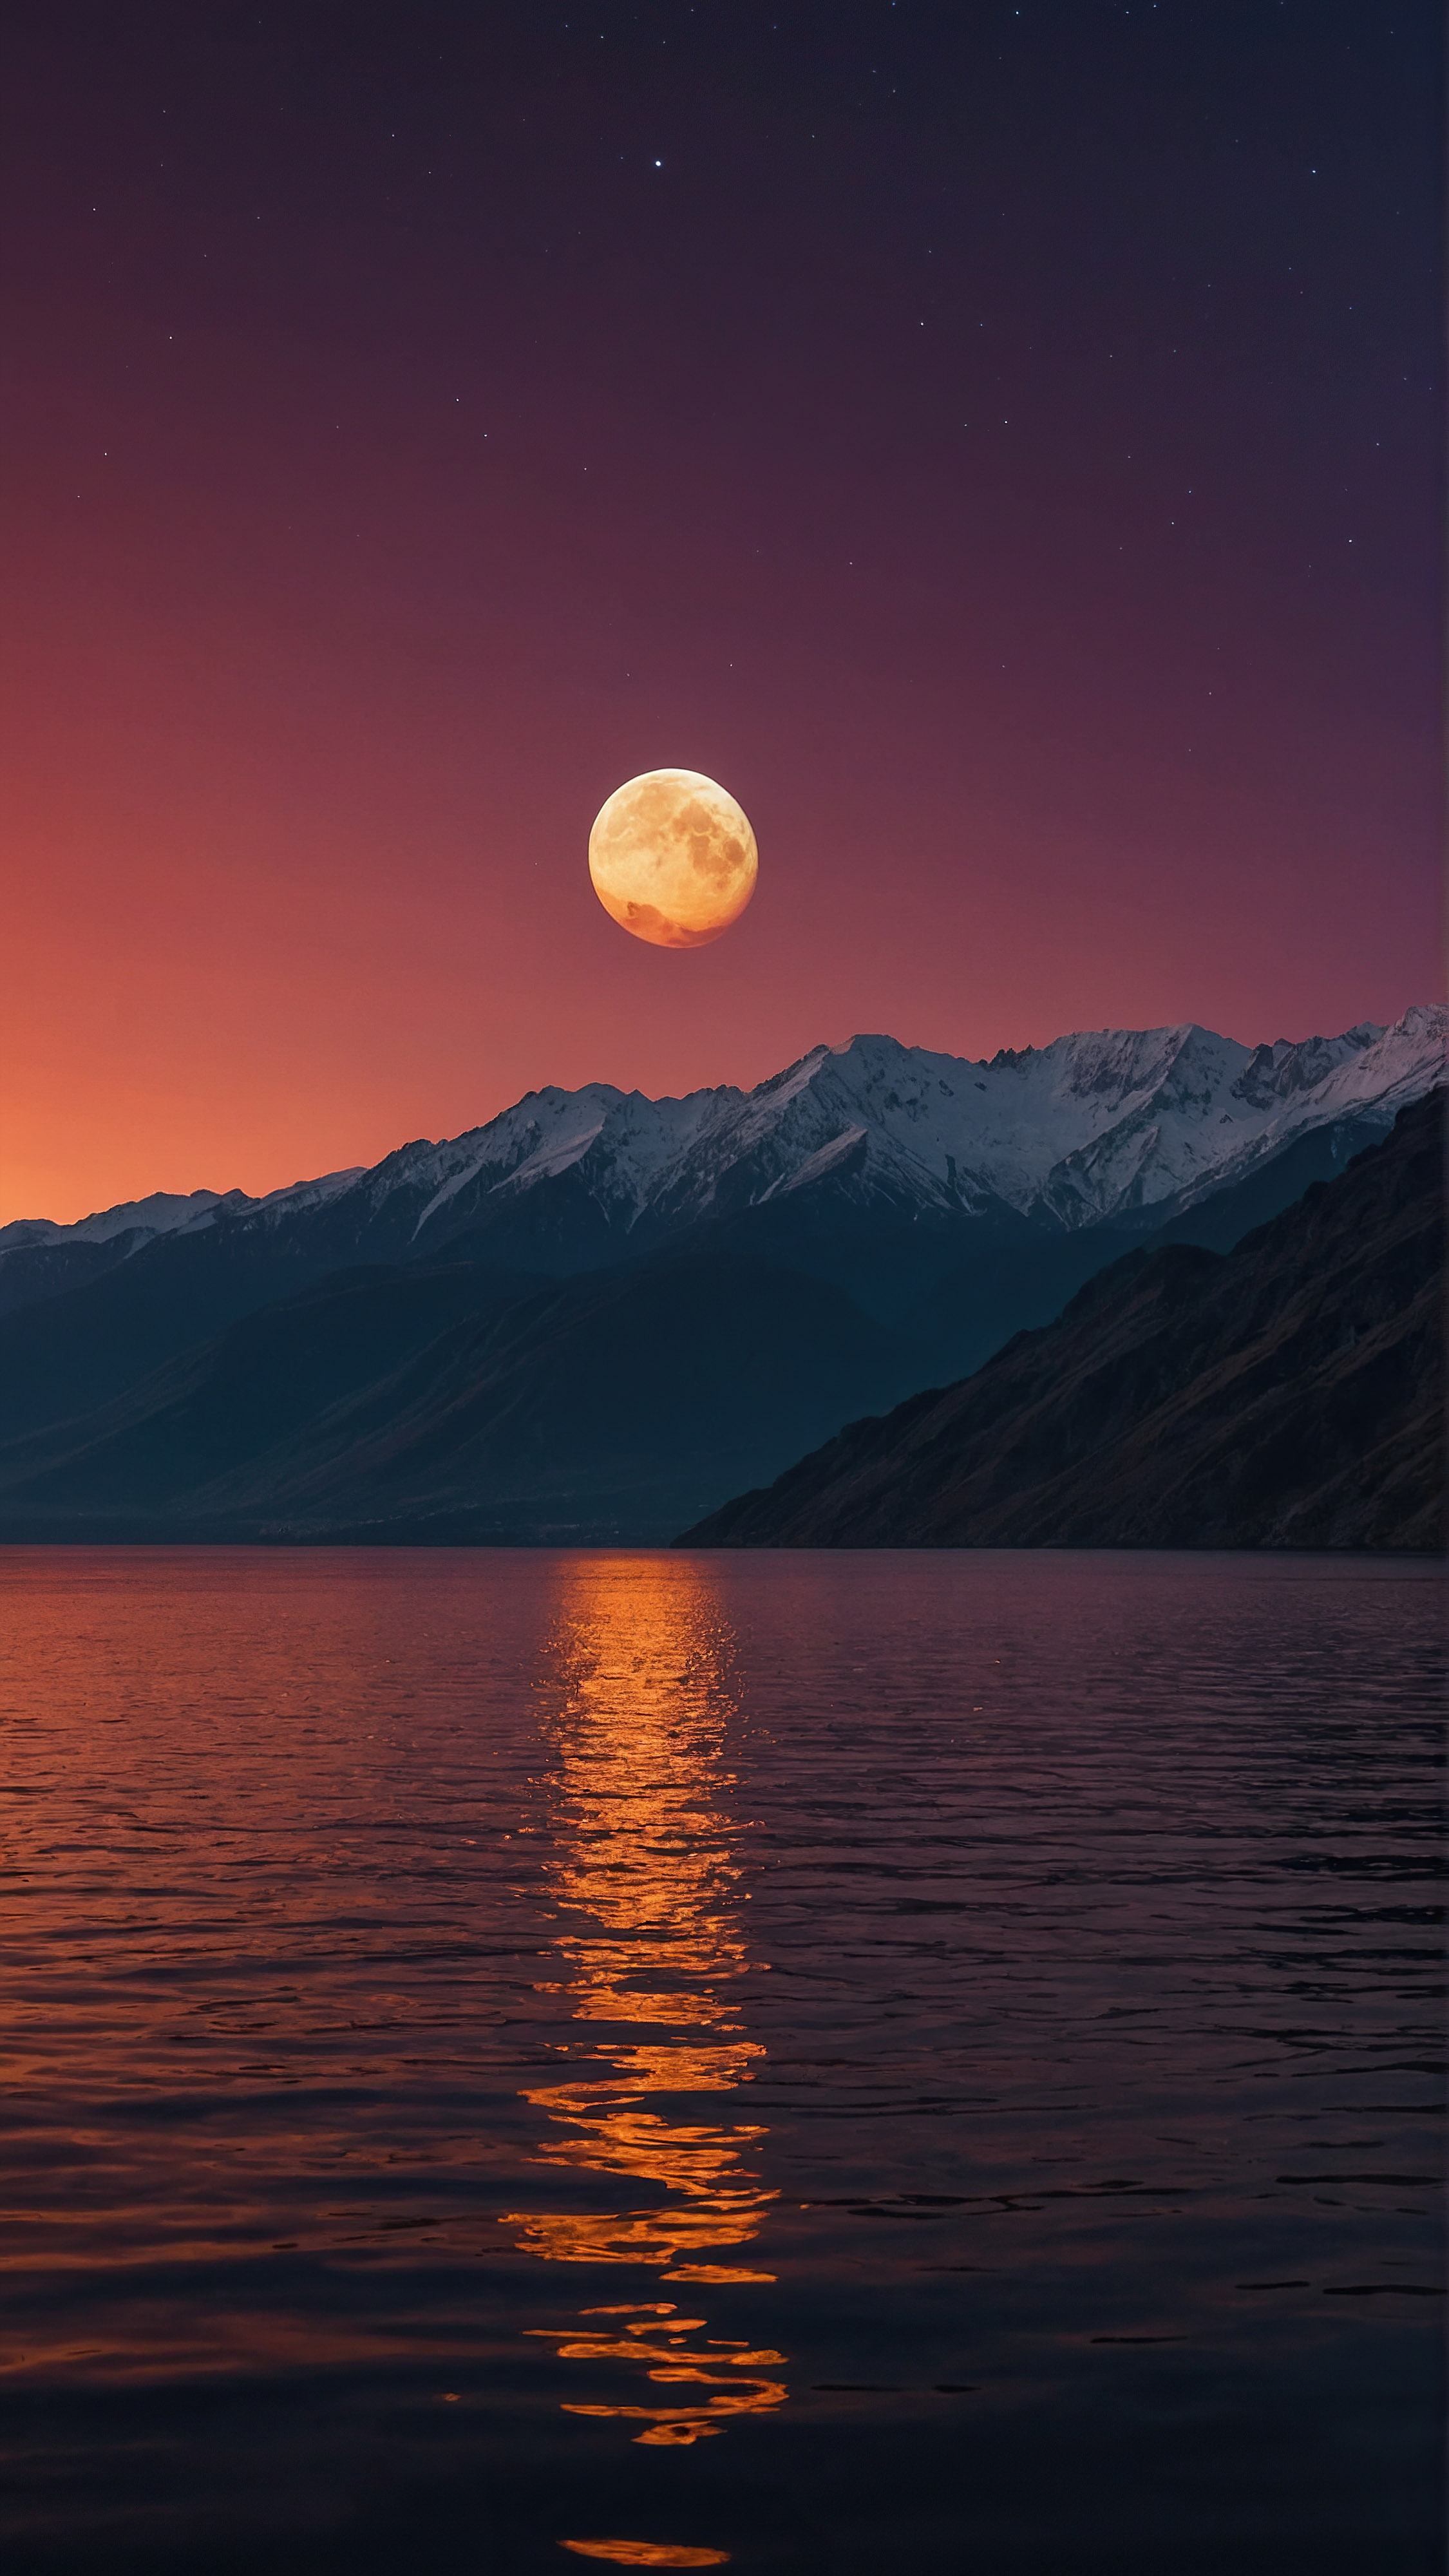 Discover the serenity of our iPhone 4K nature wallpaper, unfolding a serene and otherworldly landscape during dusk with a sky filled with vibrant hues of red, orange, and purple, a moon, and silhouetted mountains reflecting on a calm body of water below.